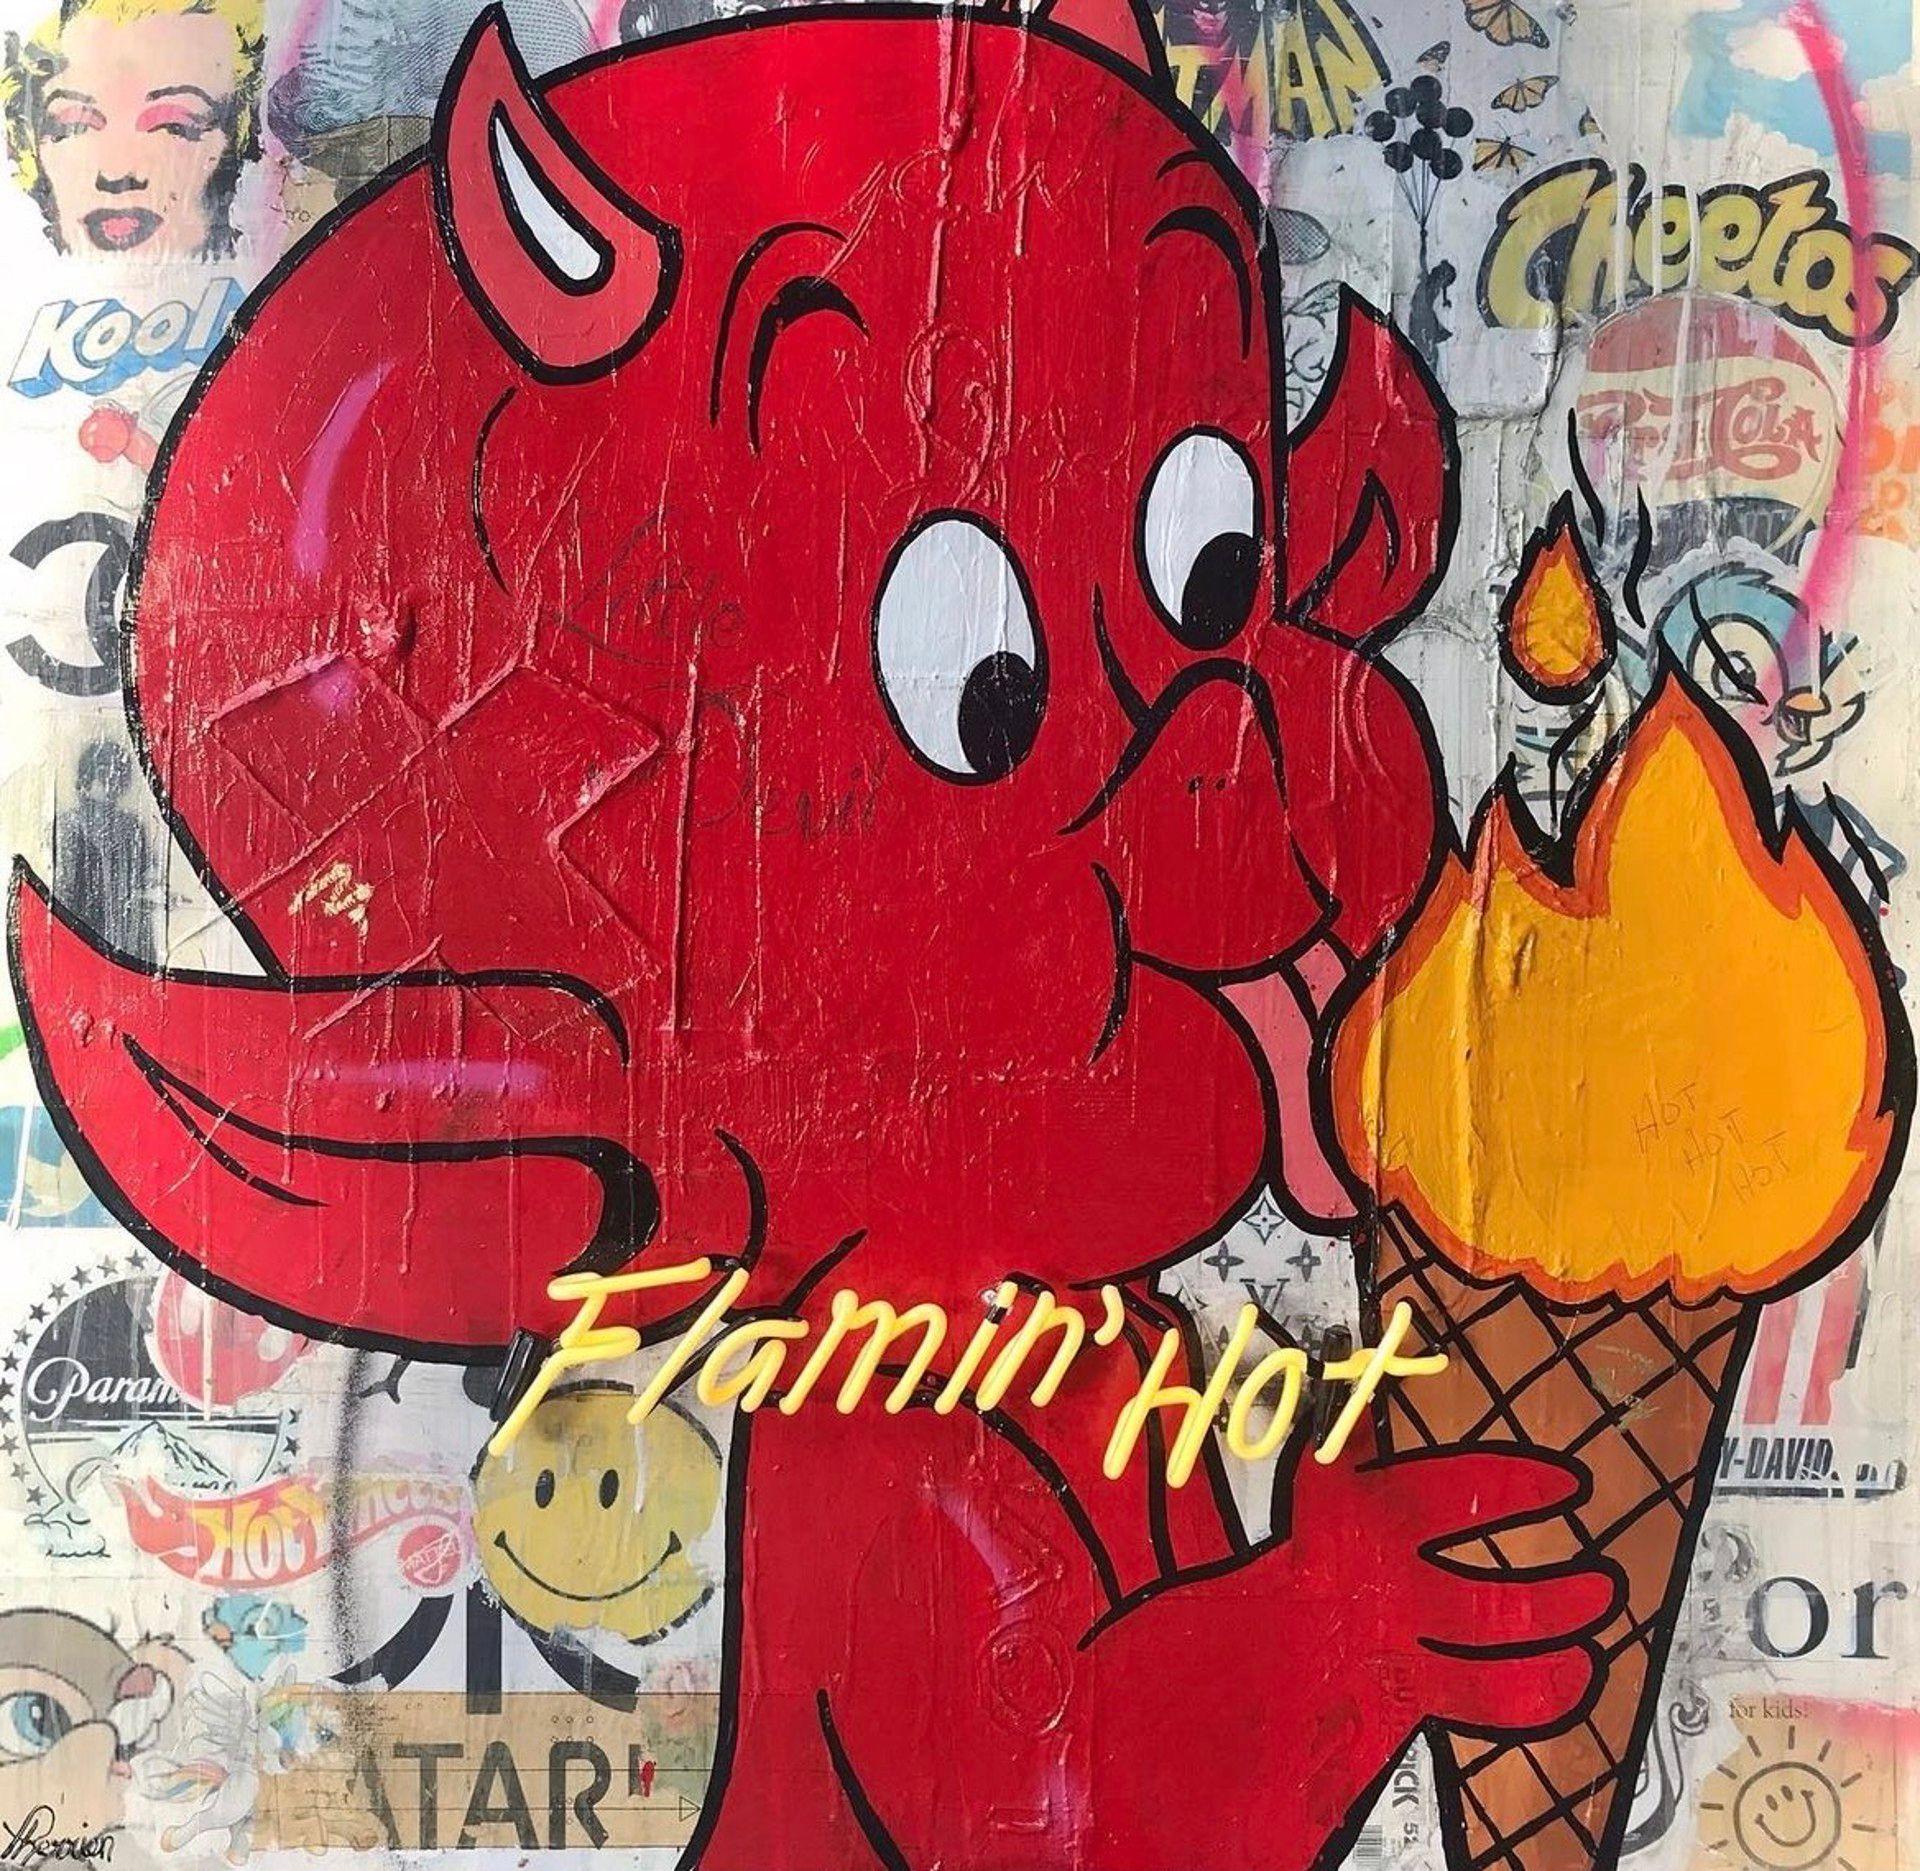 Rock Therrien "Flamin' Hot" - 2023 at The White Room Gallery in East Hampton, NY